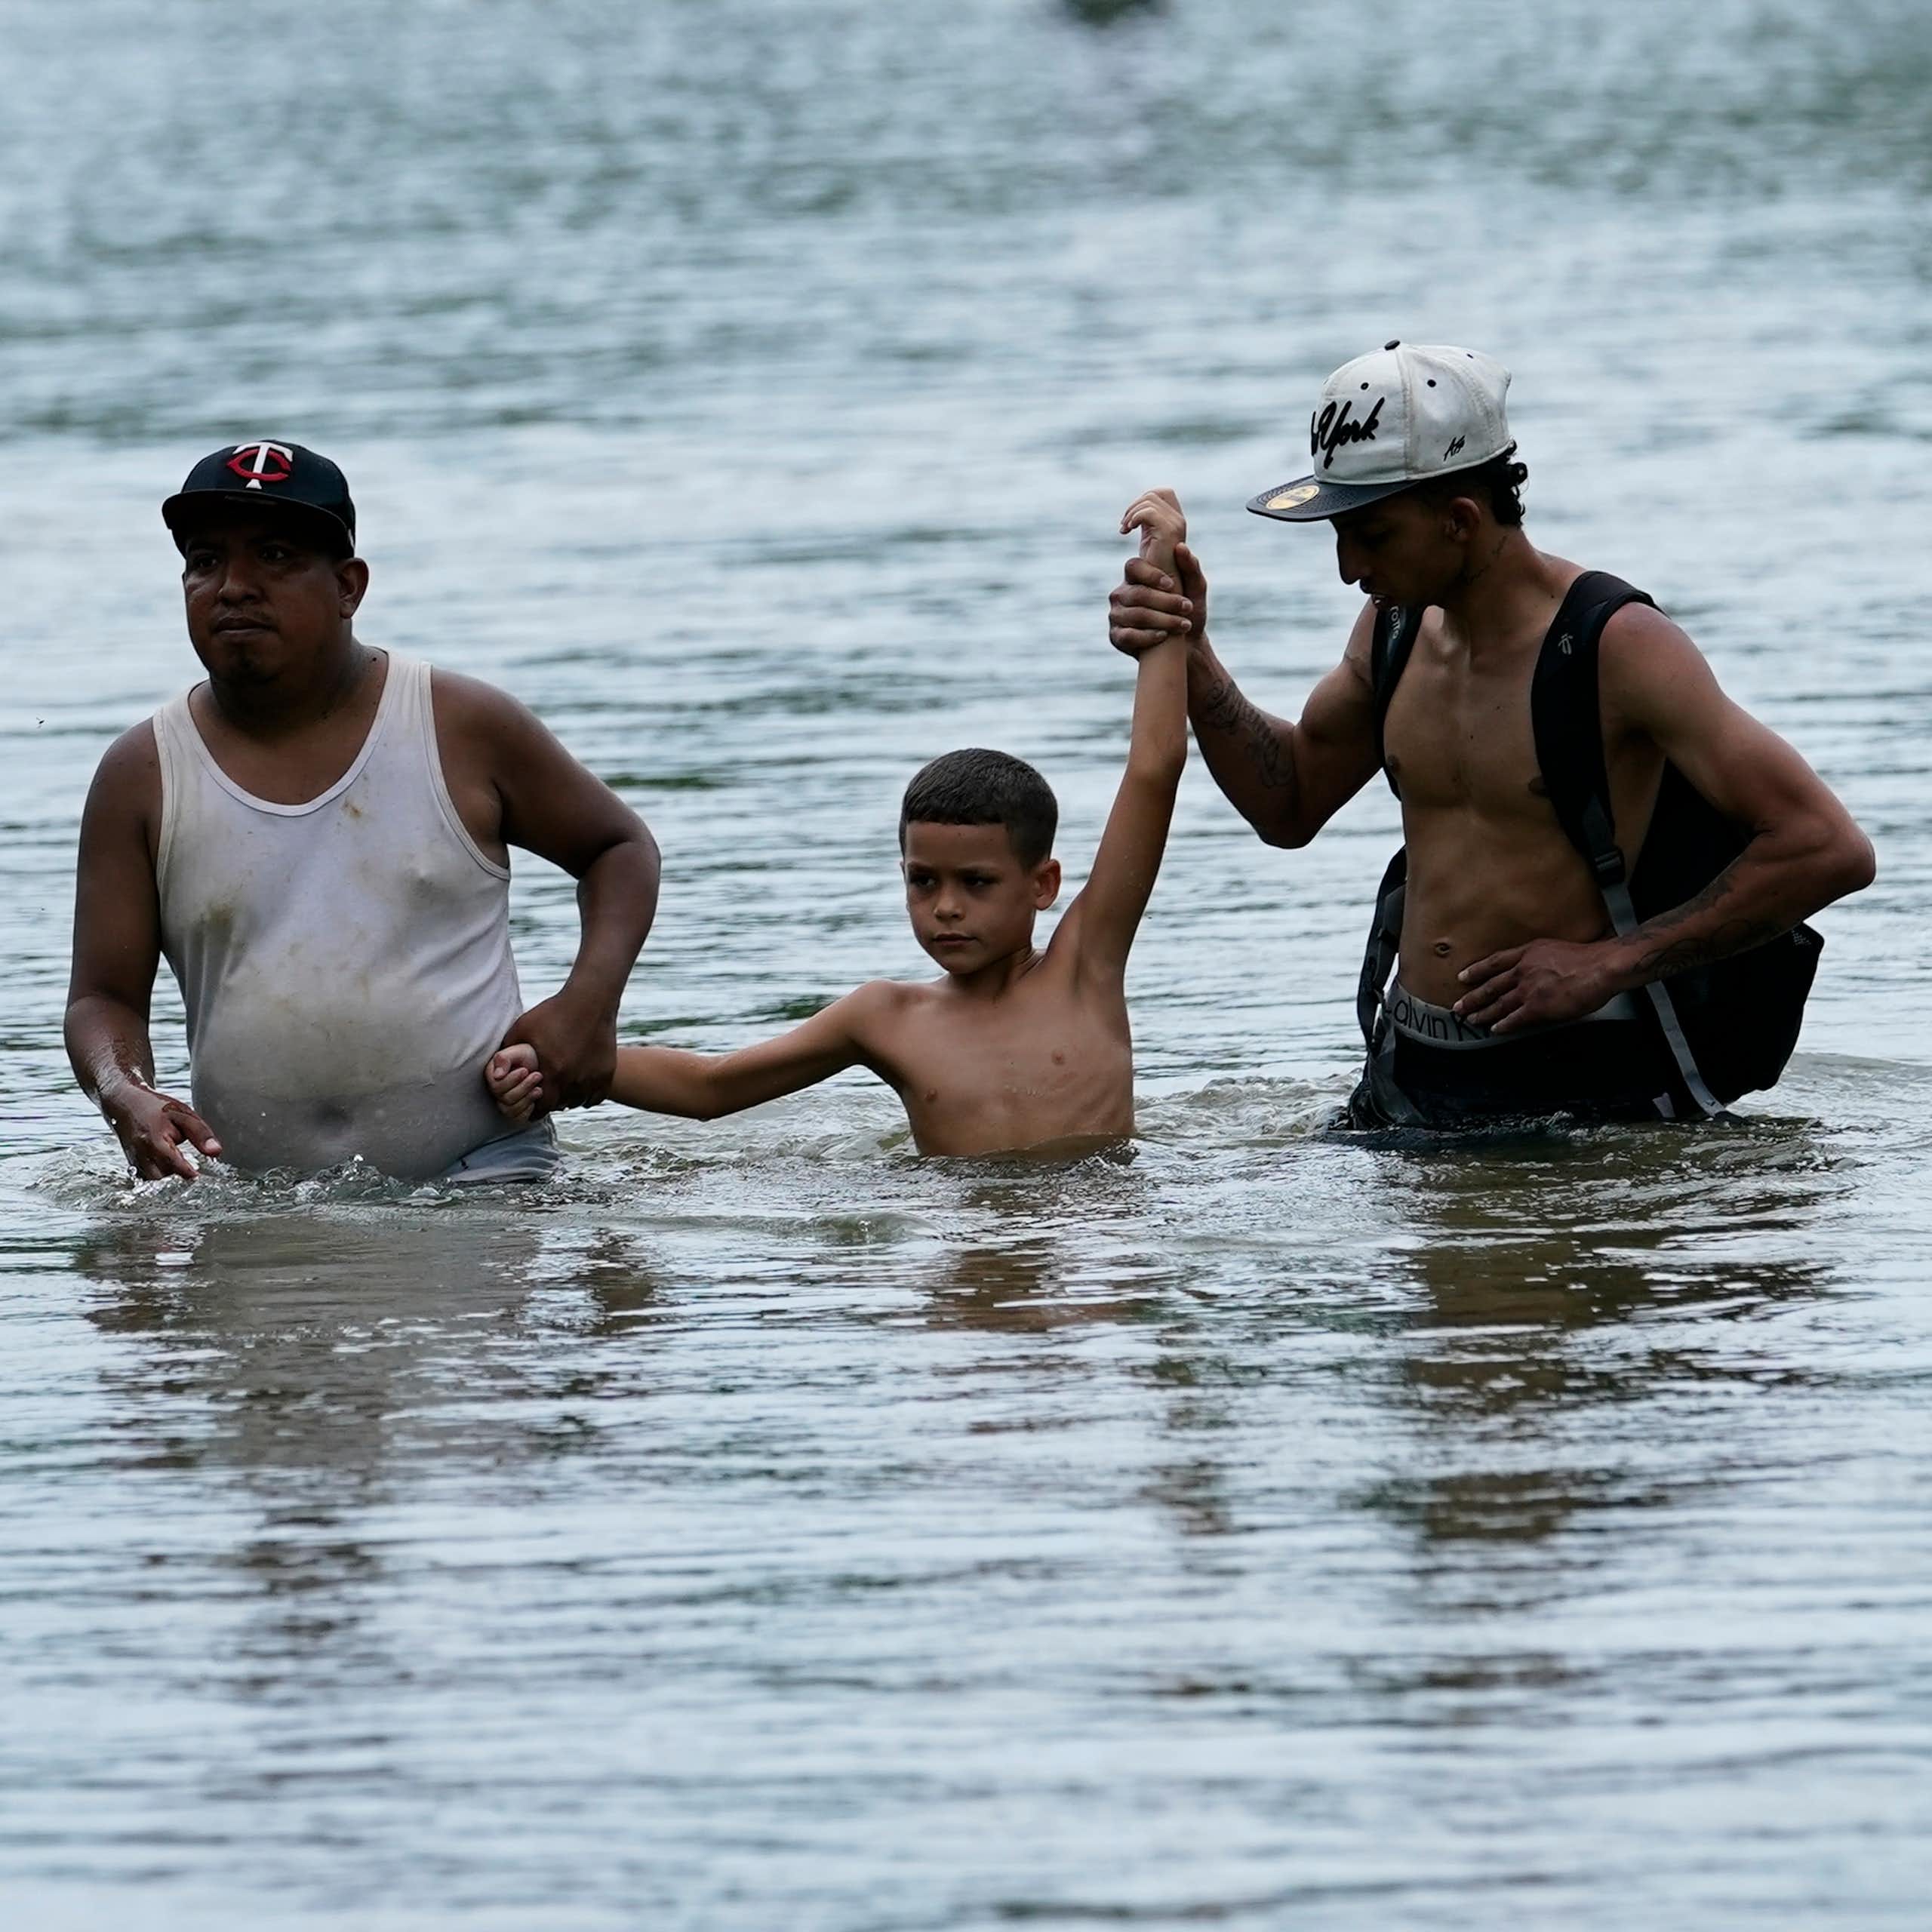 Two adults and one child are waist and chest deep in water.